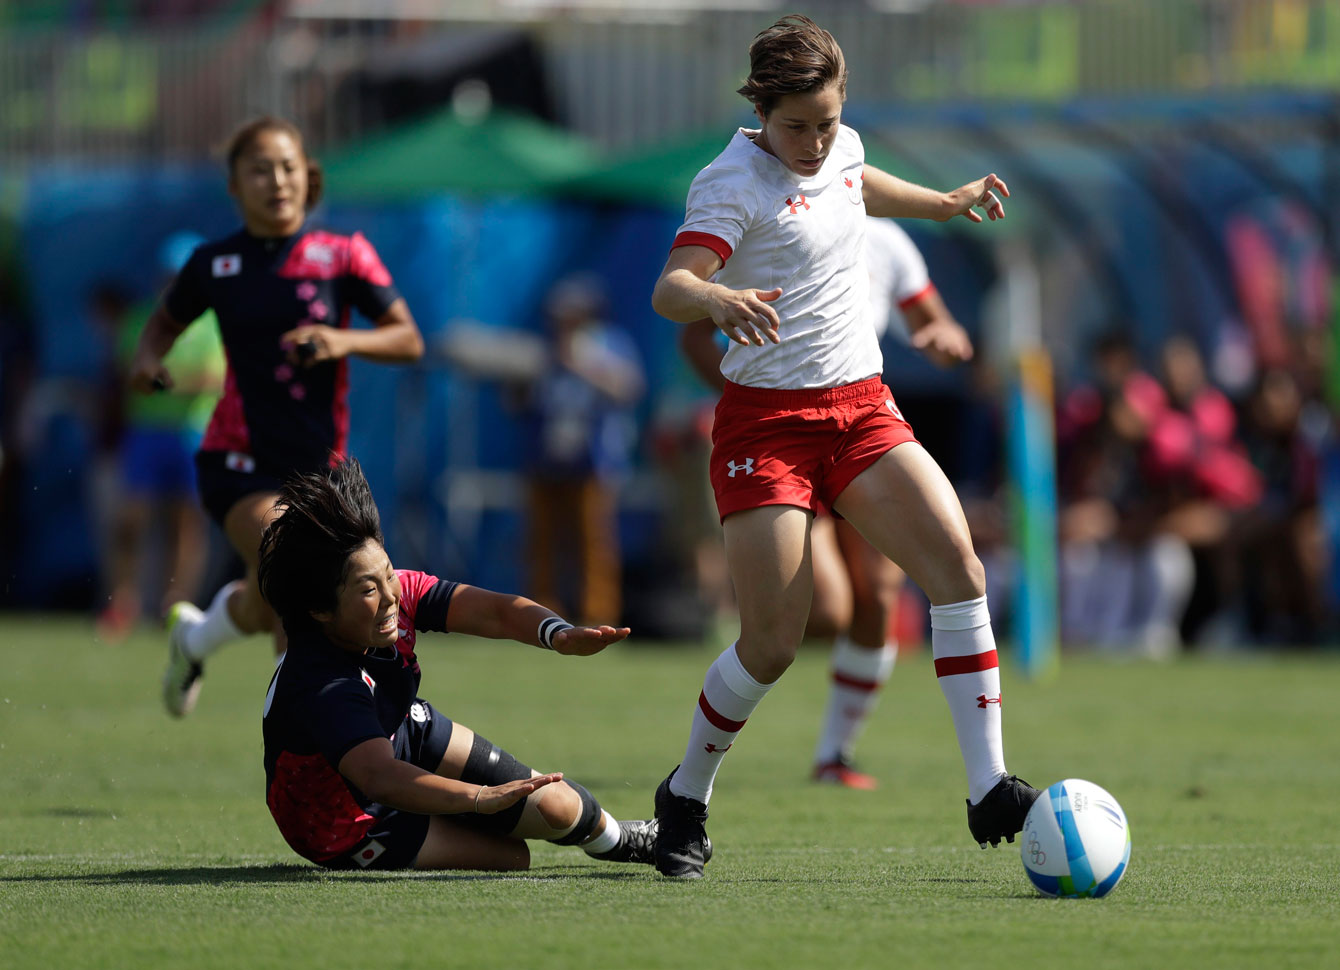 Canada's Ghislaine Landry at Canada's opening women's sevens match at Rio 2016 on Aug. 6, 2016. (AP Photo/Themba Hadebe)